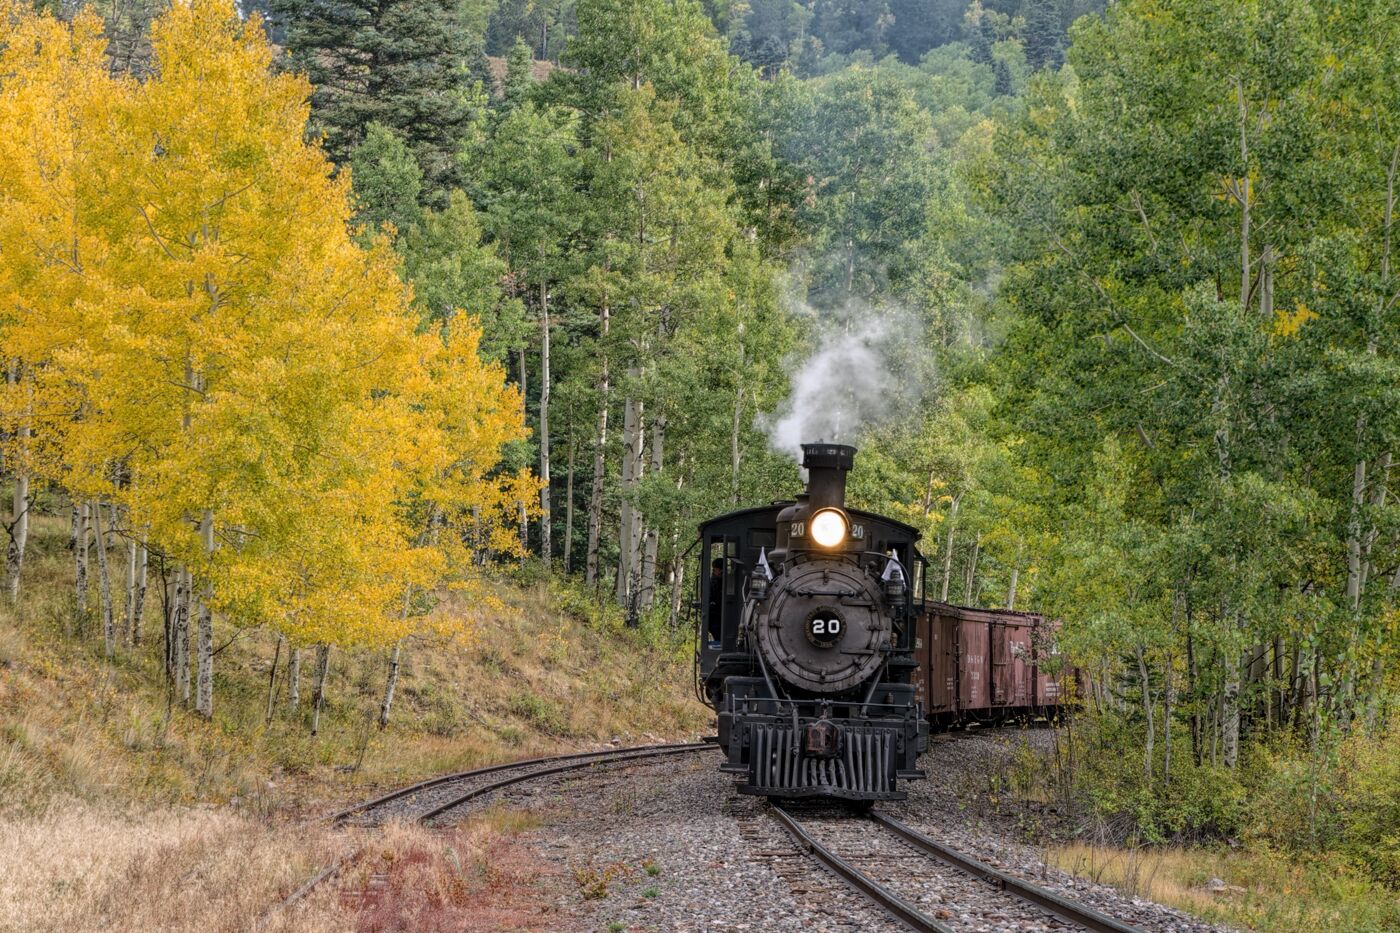 Rio Grande Southern number 20 makes its way to Oiser on a colorful fall day on the Cumbres and Toltec Scenic Railroad.